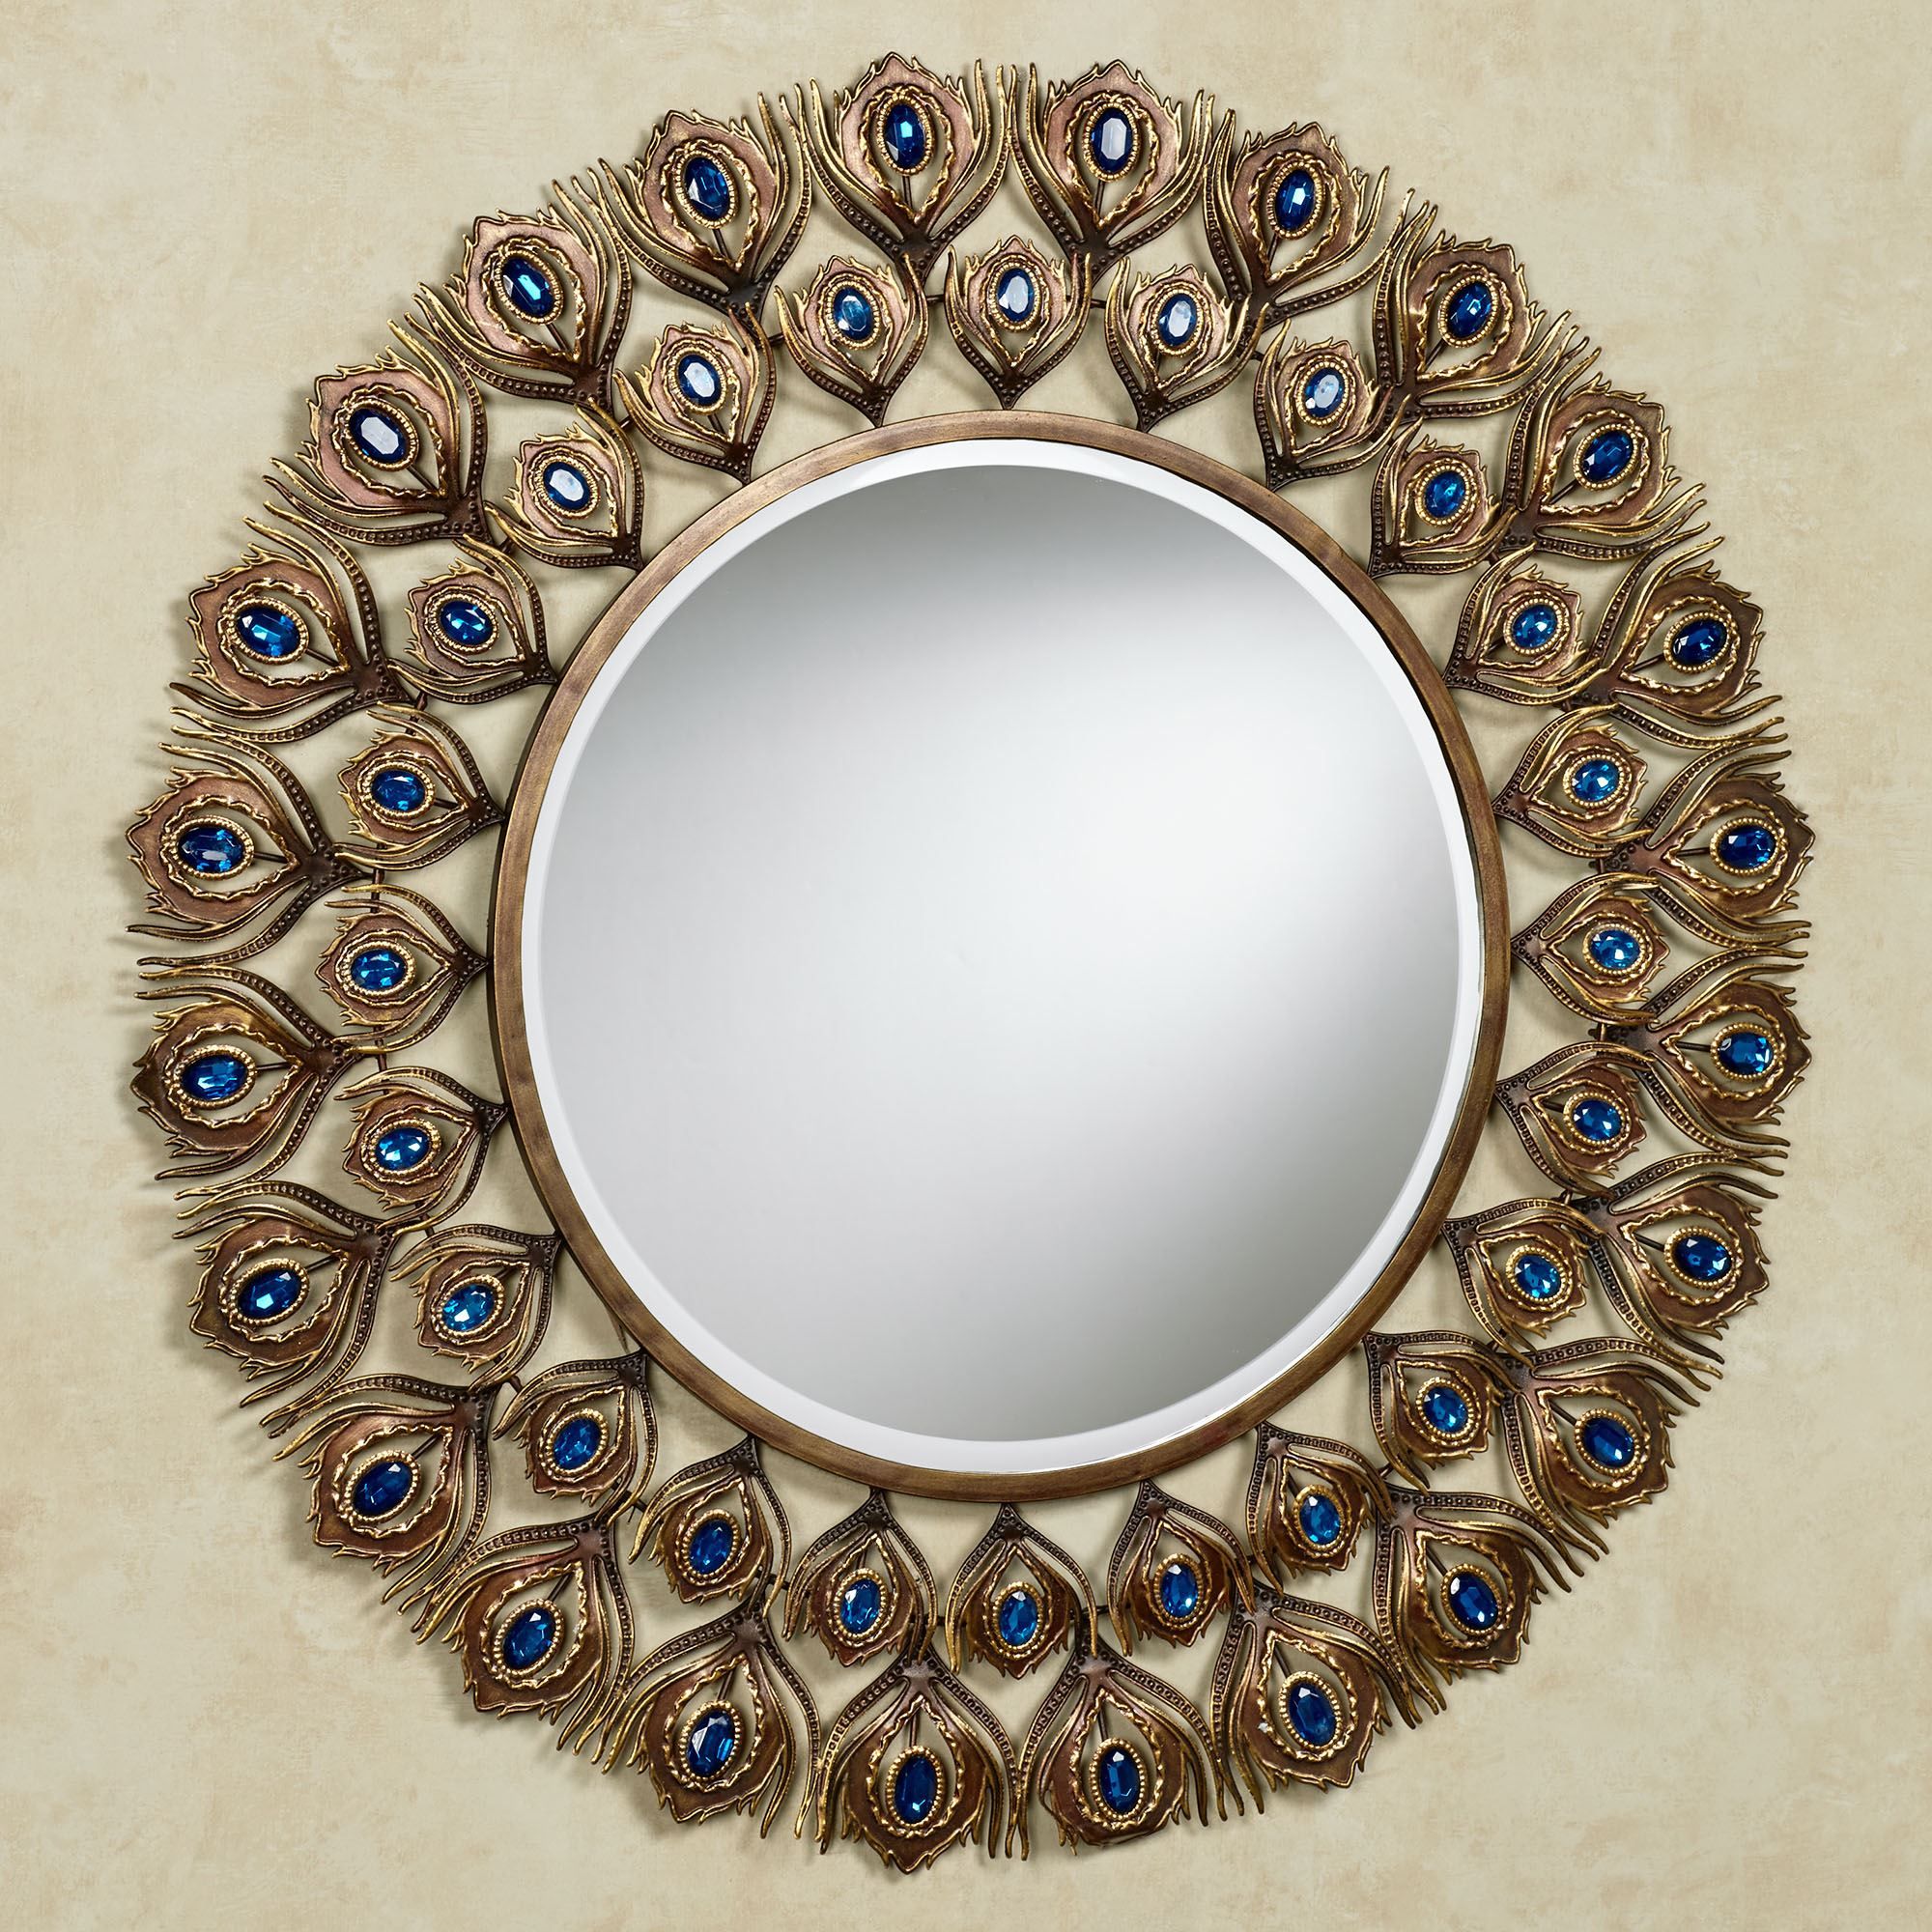 Royal Peacock Jeweled Round Wall Mirror Regarding Scalloped Round Wall Mirrors (View 6 of 15)